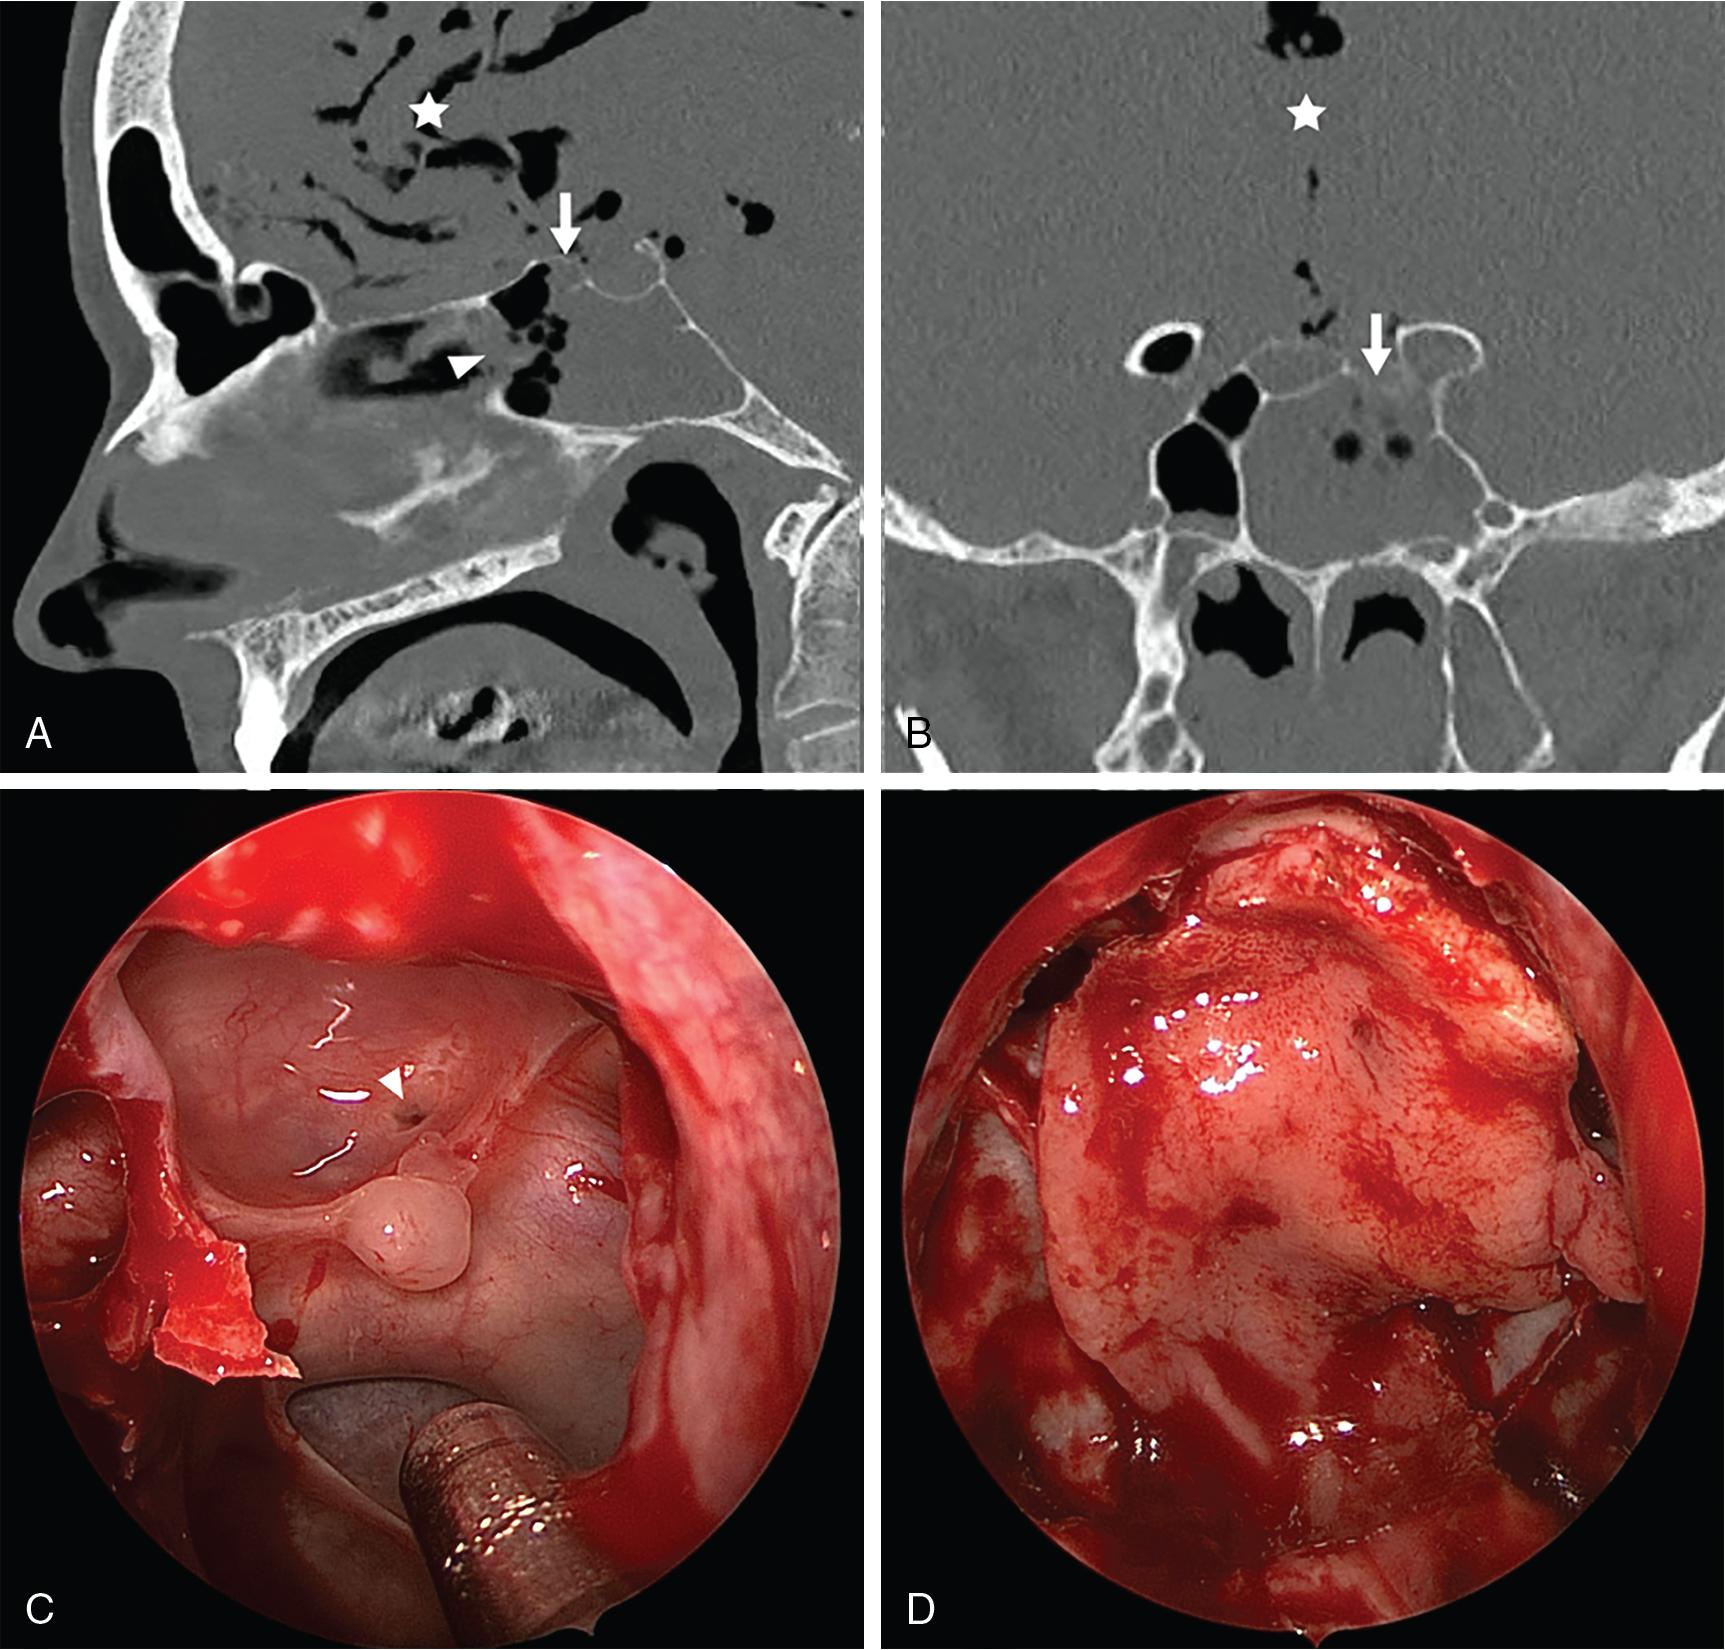 Fig. 12.3, Sagittal ( A ) and coronal ( B ) reconstructions from noncontrast sinus computed tomography demonstrate a large amount of pneumocephalus localizing to the interhemispheric region in the anterior cranial fossa (star). An area of bone thinning and irregularity in the planum sphenoidale just anterior to the sella and to the left of midline is suspicious for the site of breach (arrow). Note the widened left sphenoid ostium after balloon dilation (arrowhead). C, Endoscopic view of iatrogenic planum defect thought to be caused by a balloon guidewire. D, Endoscopic view after preparation of the defect site with removal of the surrounding mucosa and repair with a pedicled nasoseptal flap.